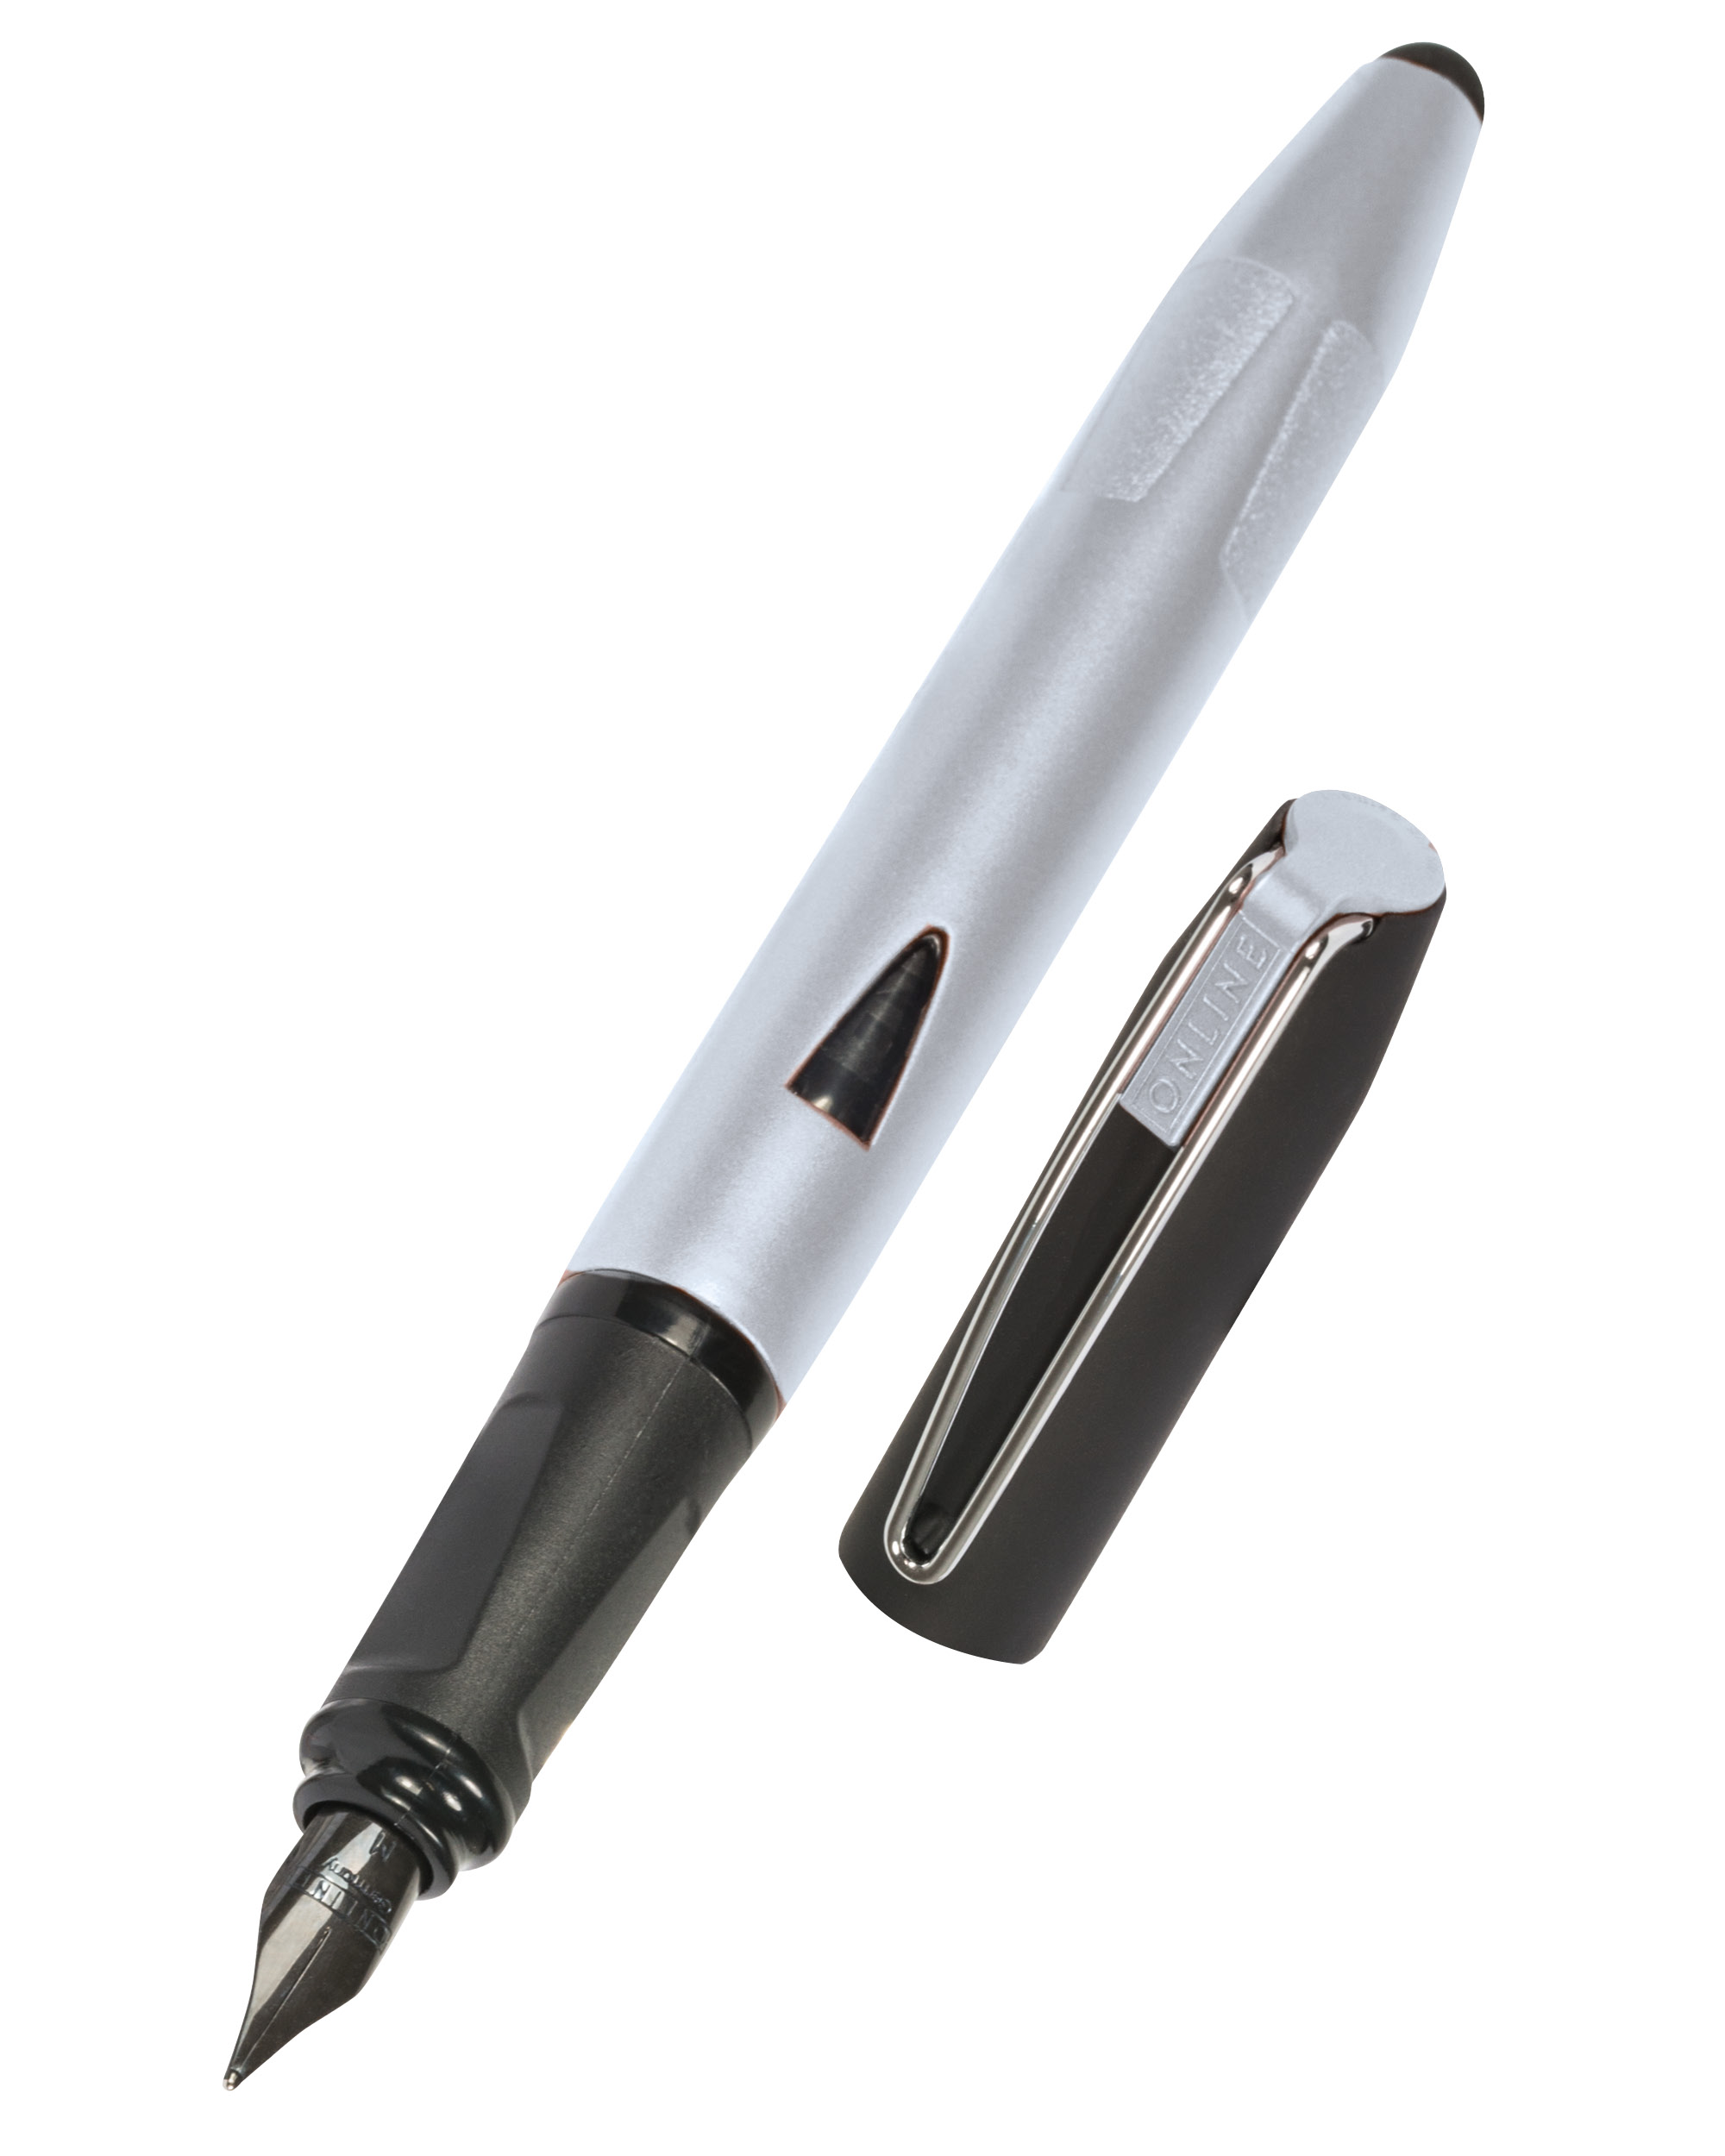 Switch Pen Barrel with Stylus Tip